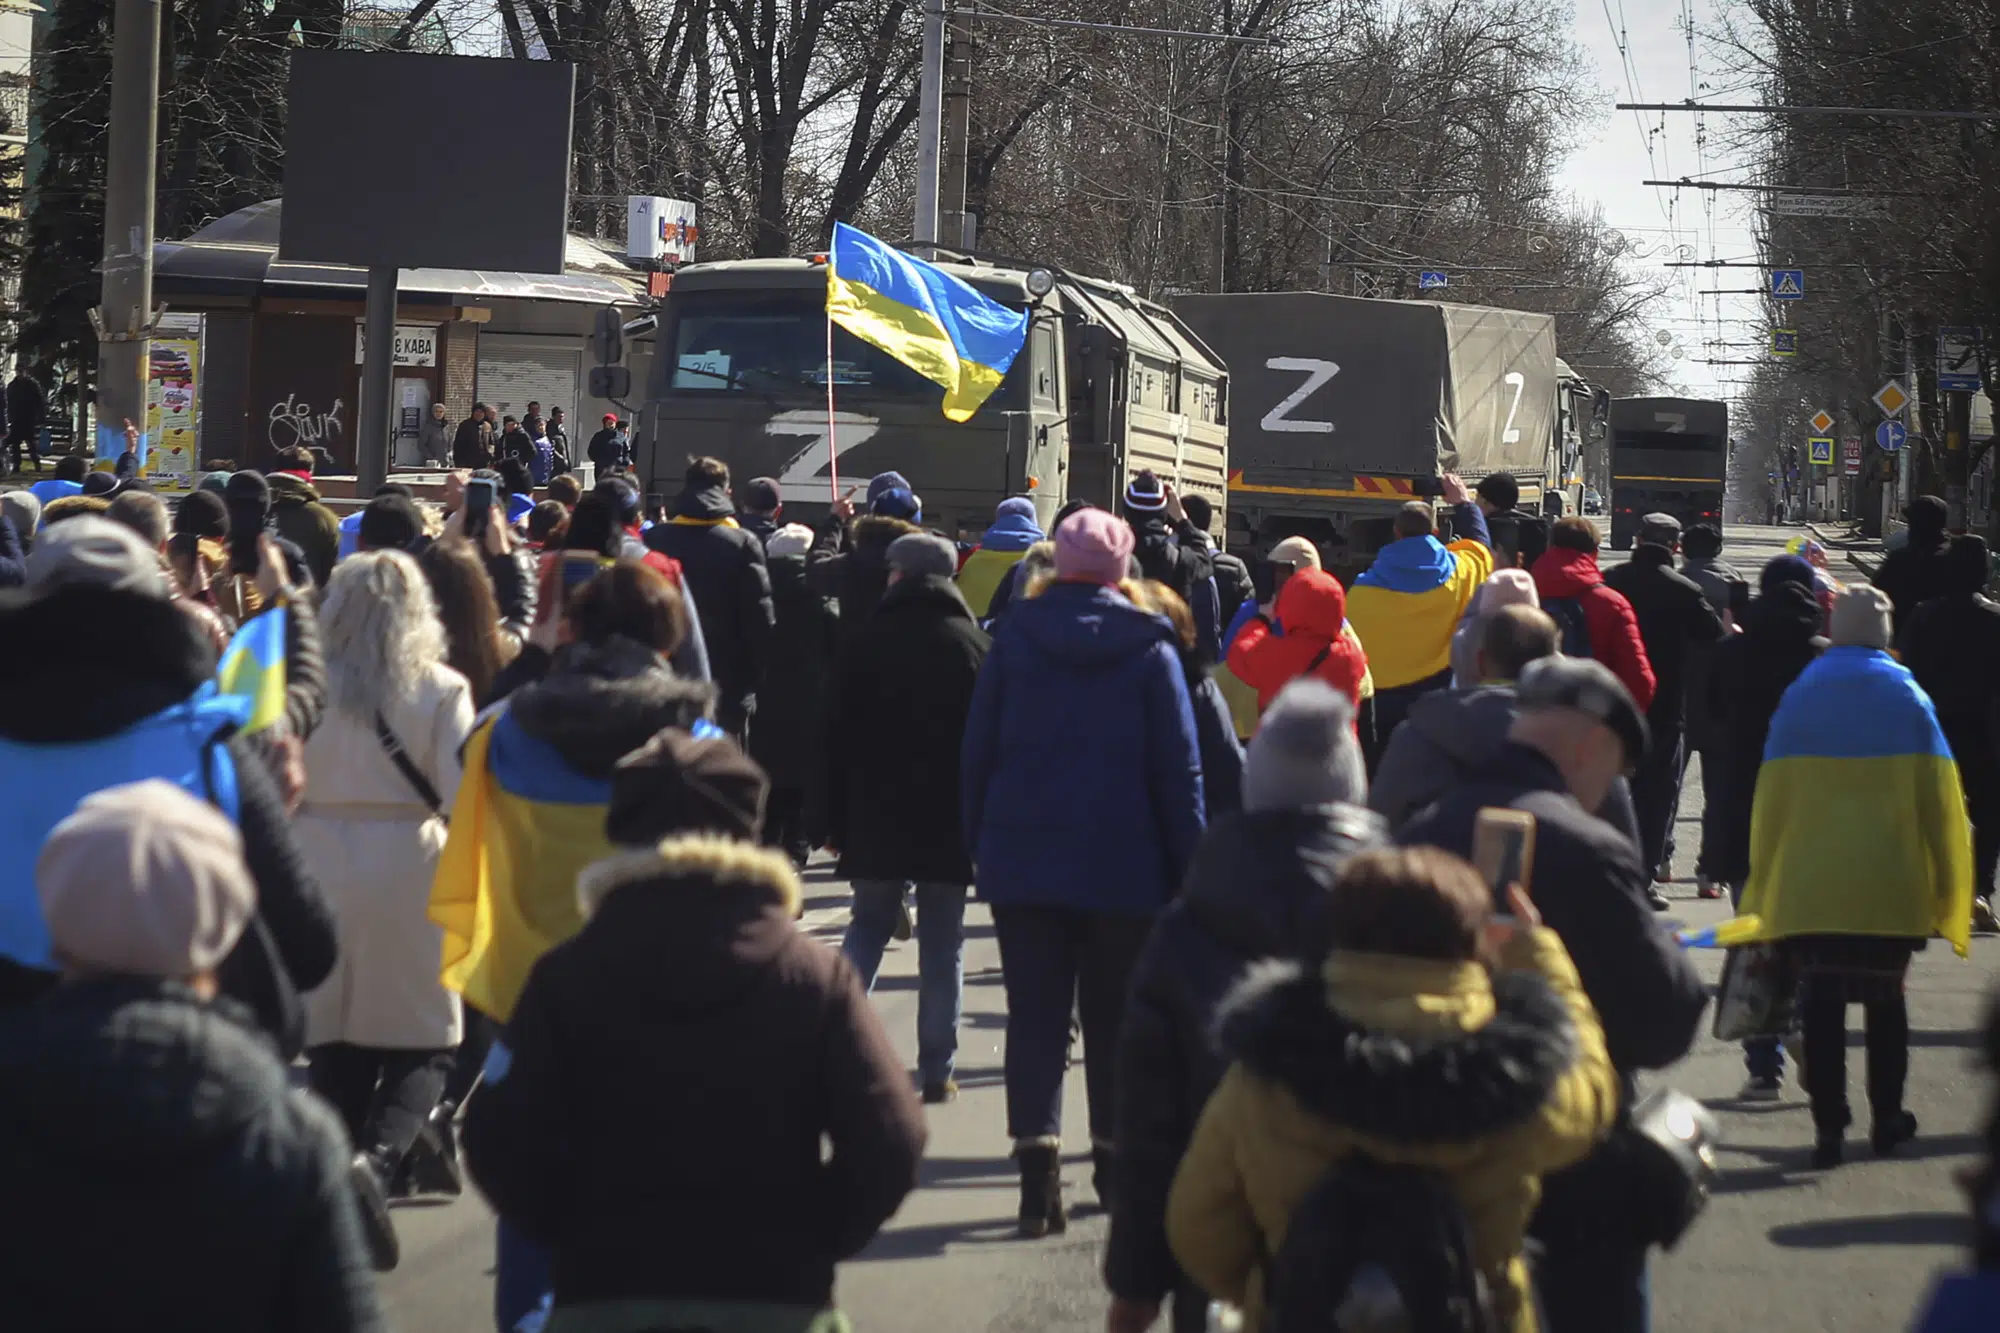 FILE - People with Ukrainian flags walk towards Russian army trucks during a rally against the Russian occupation in Kherson, Ukraine, on March 20, 2022. As Russian forces sought to tighten their hold on Melitopol, hundreds of residents took to the streets to demand the mayor's release. (AP Photo/Olexandr Chornyi, File)